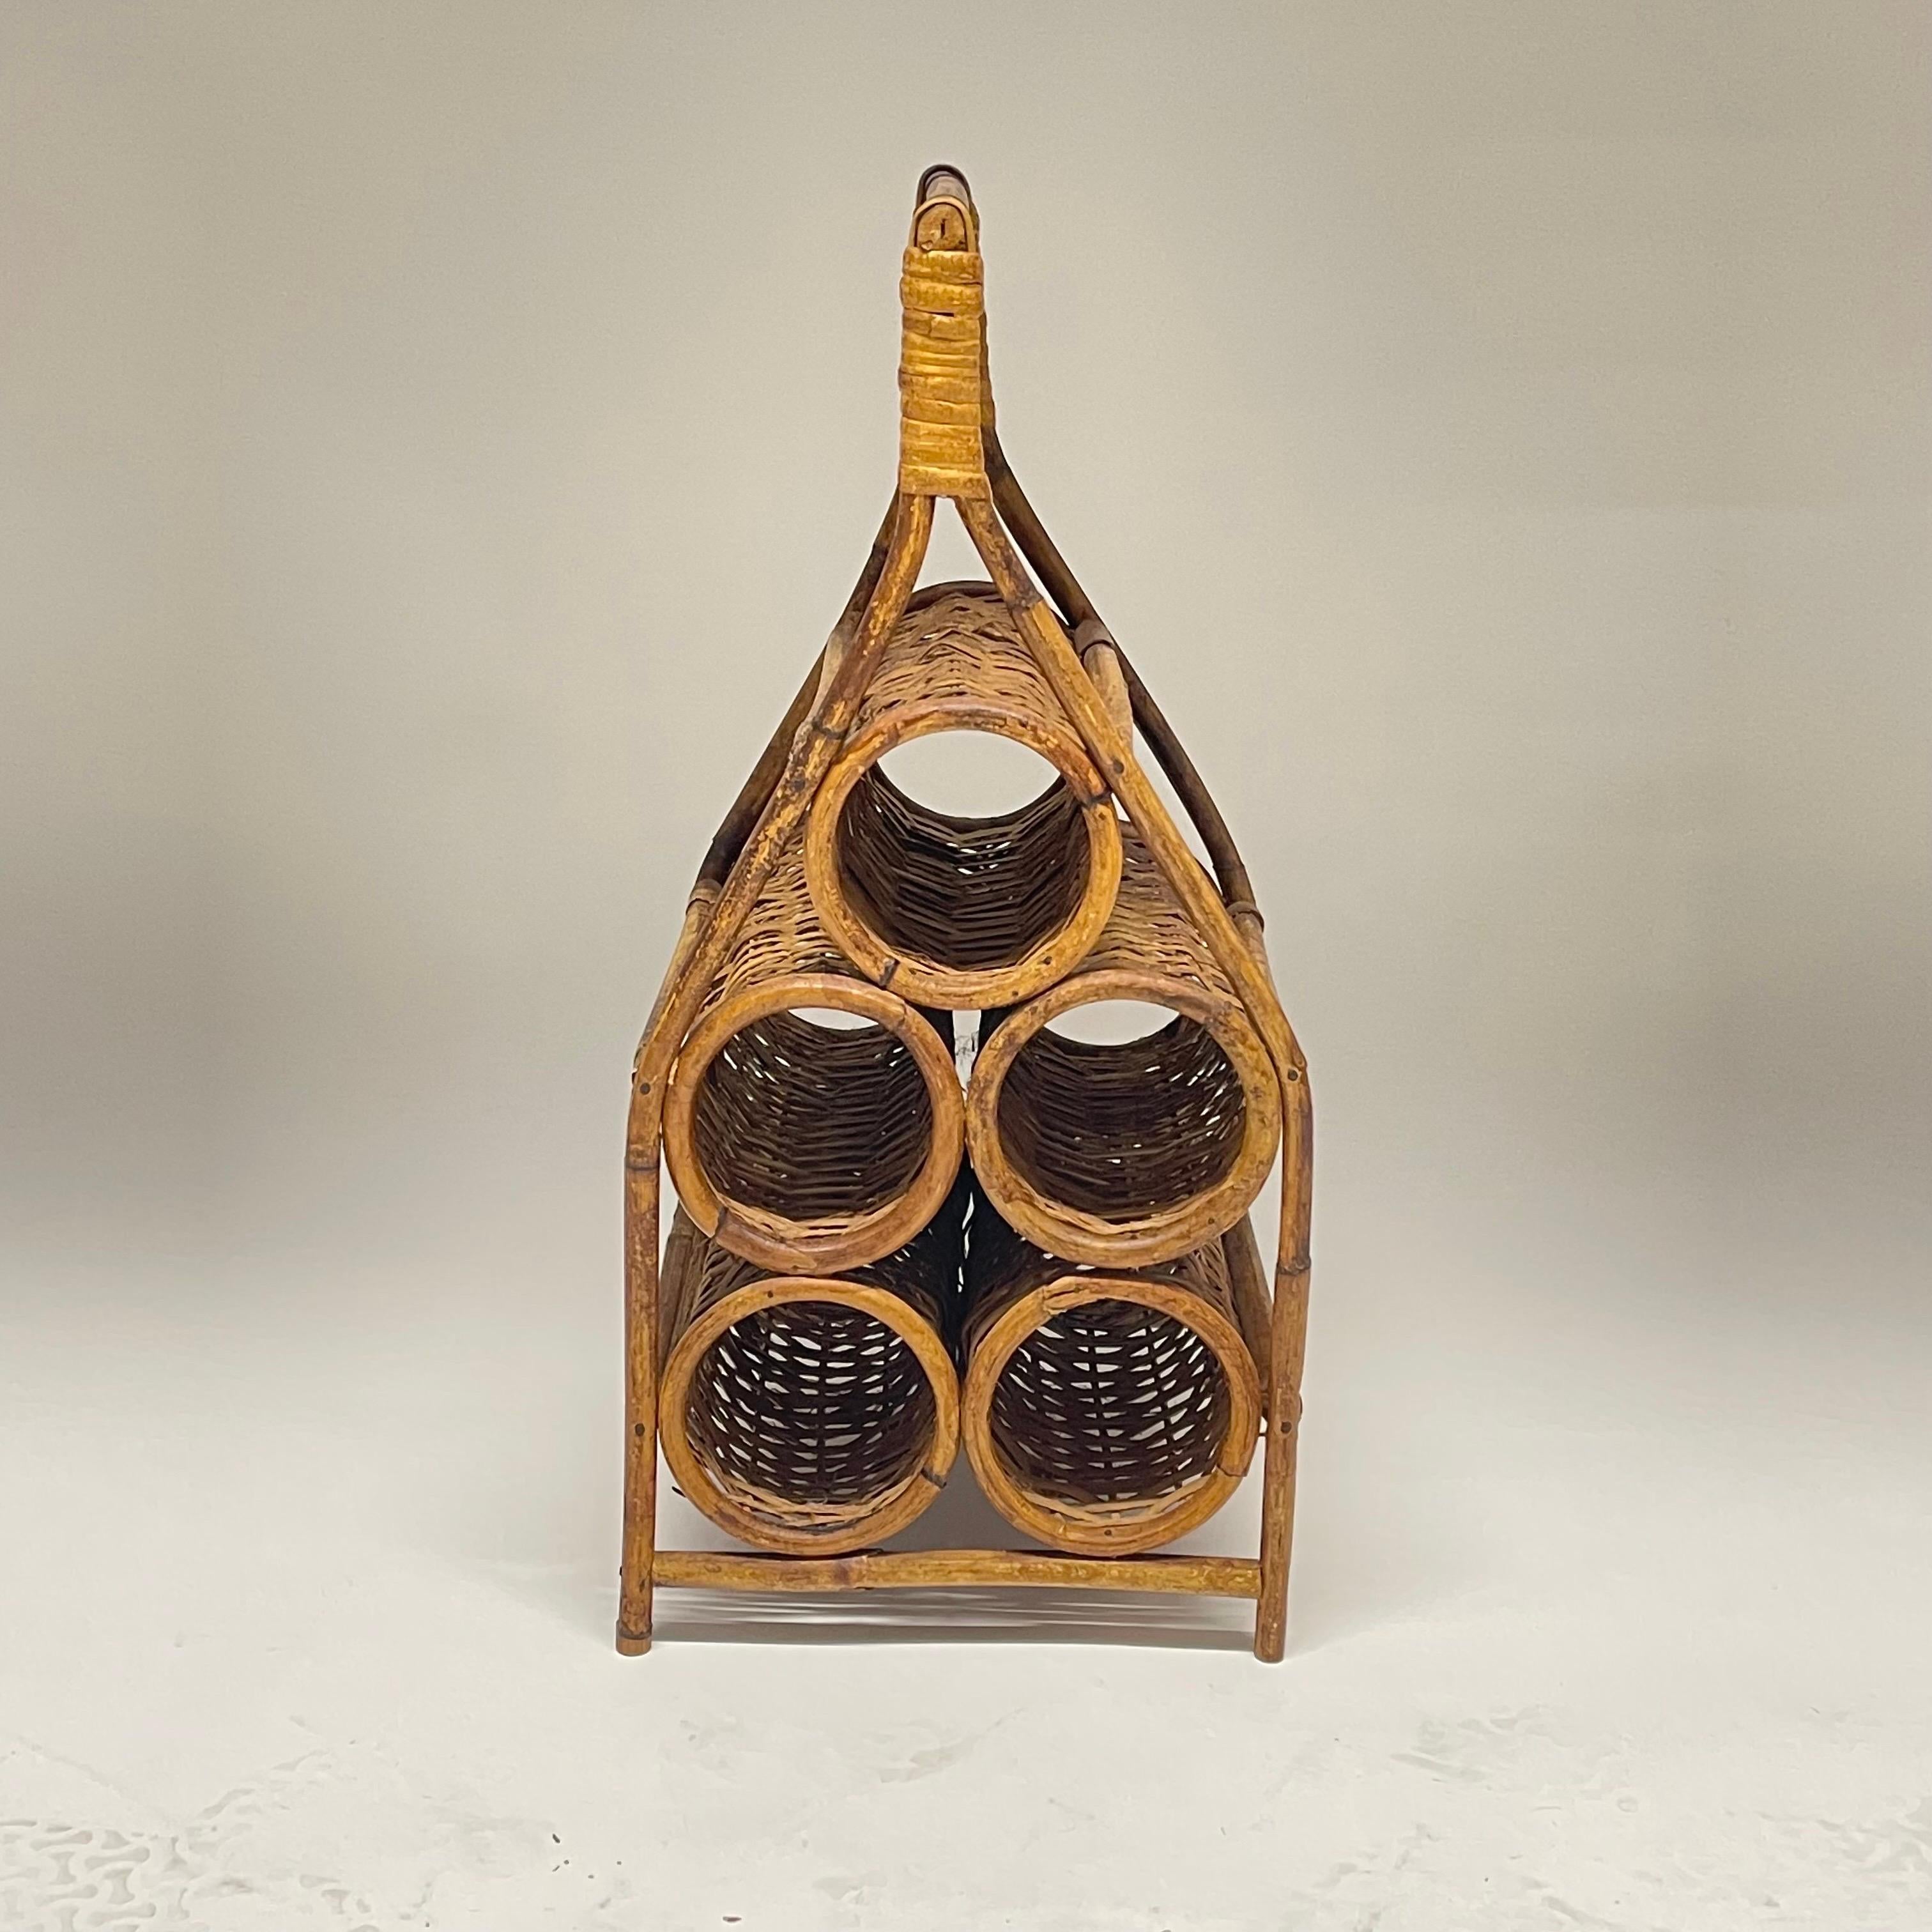 Sculptural midcentury French wine rack or wine holder, rendered in hand woven wicker, and hand bent rattan and bamboo with capacity to hold up to 5 bottles of wine with a handle for transporting if necessary. Made in France, circa 1960s.